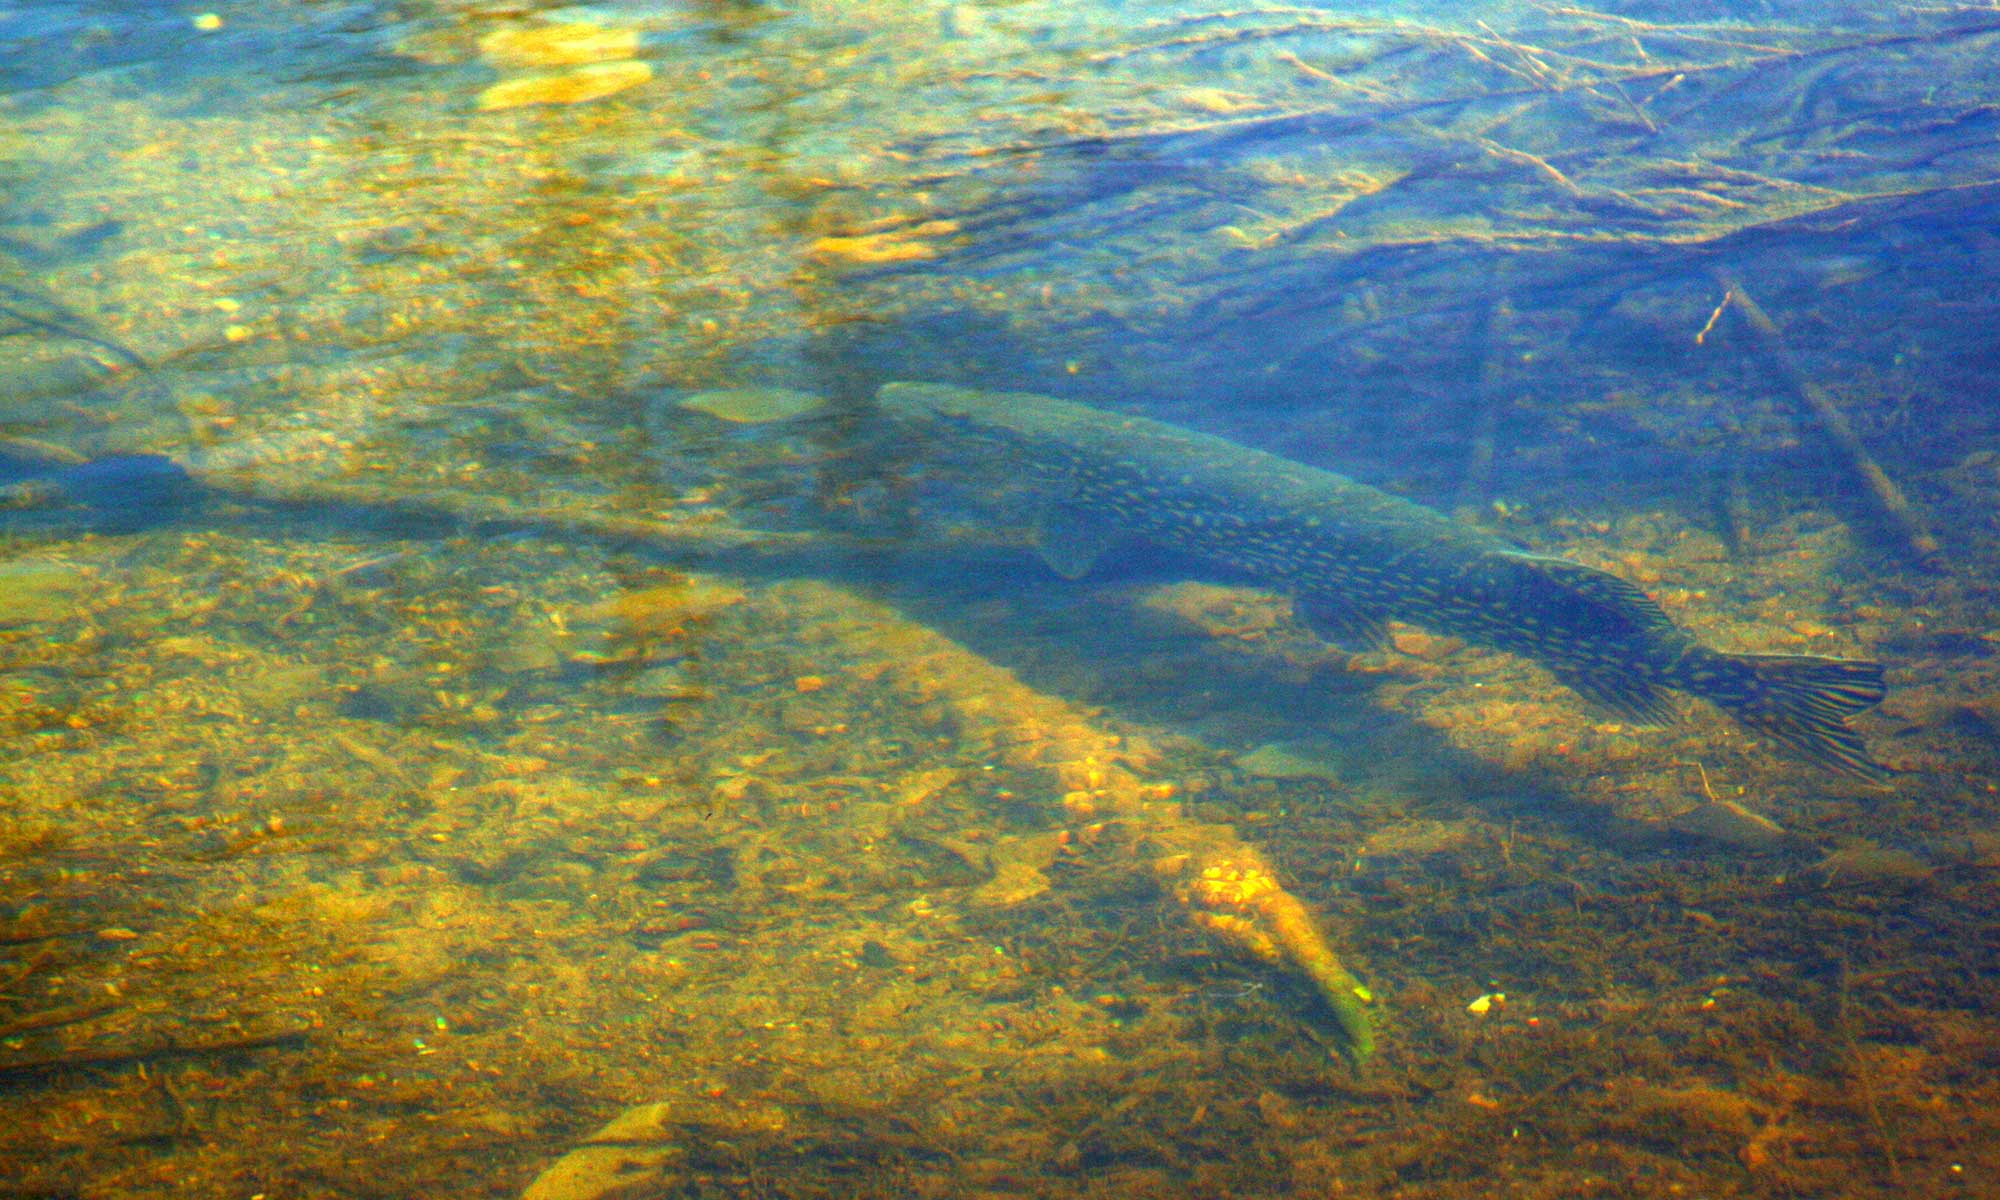 Northern Pike @ Consesus Inlet, NY